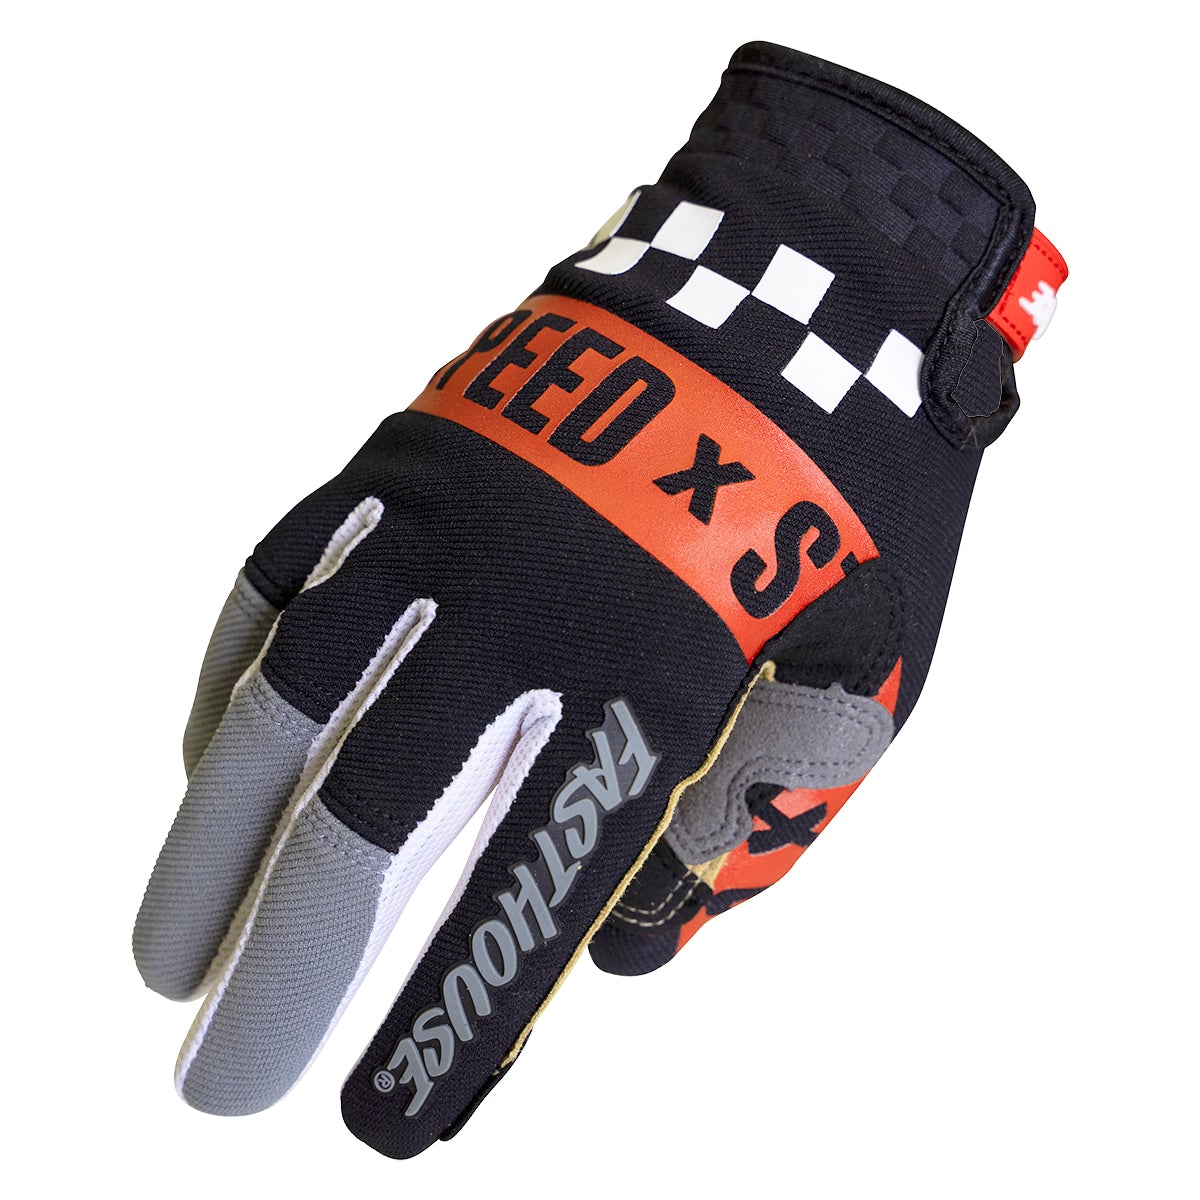 Guantes Fasthouse Speed Style Domingo